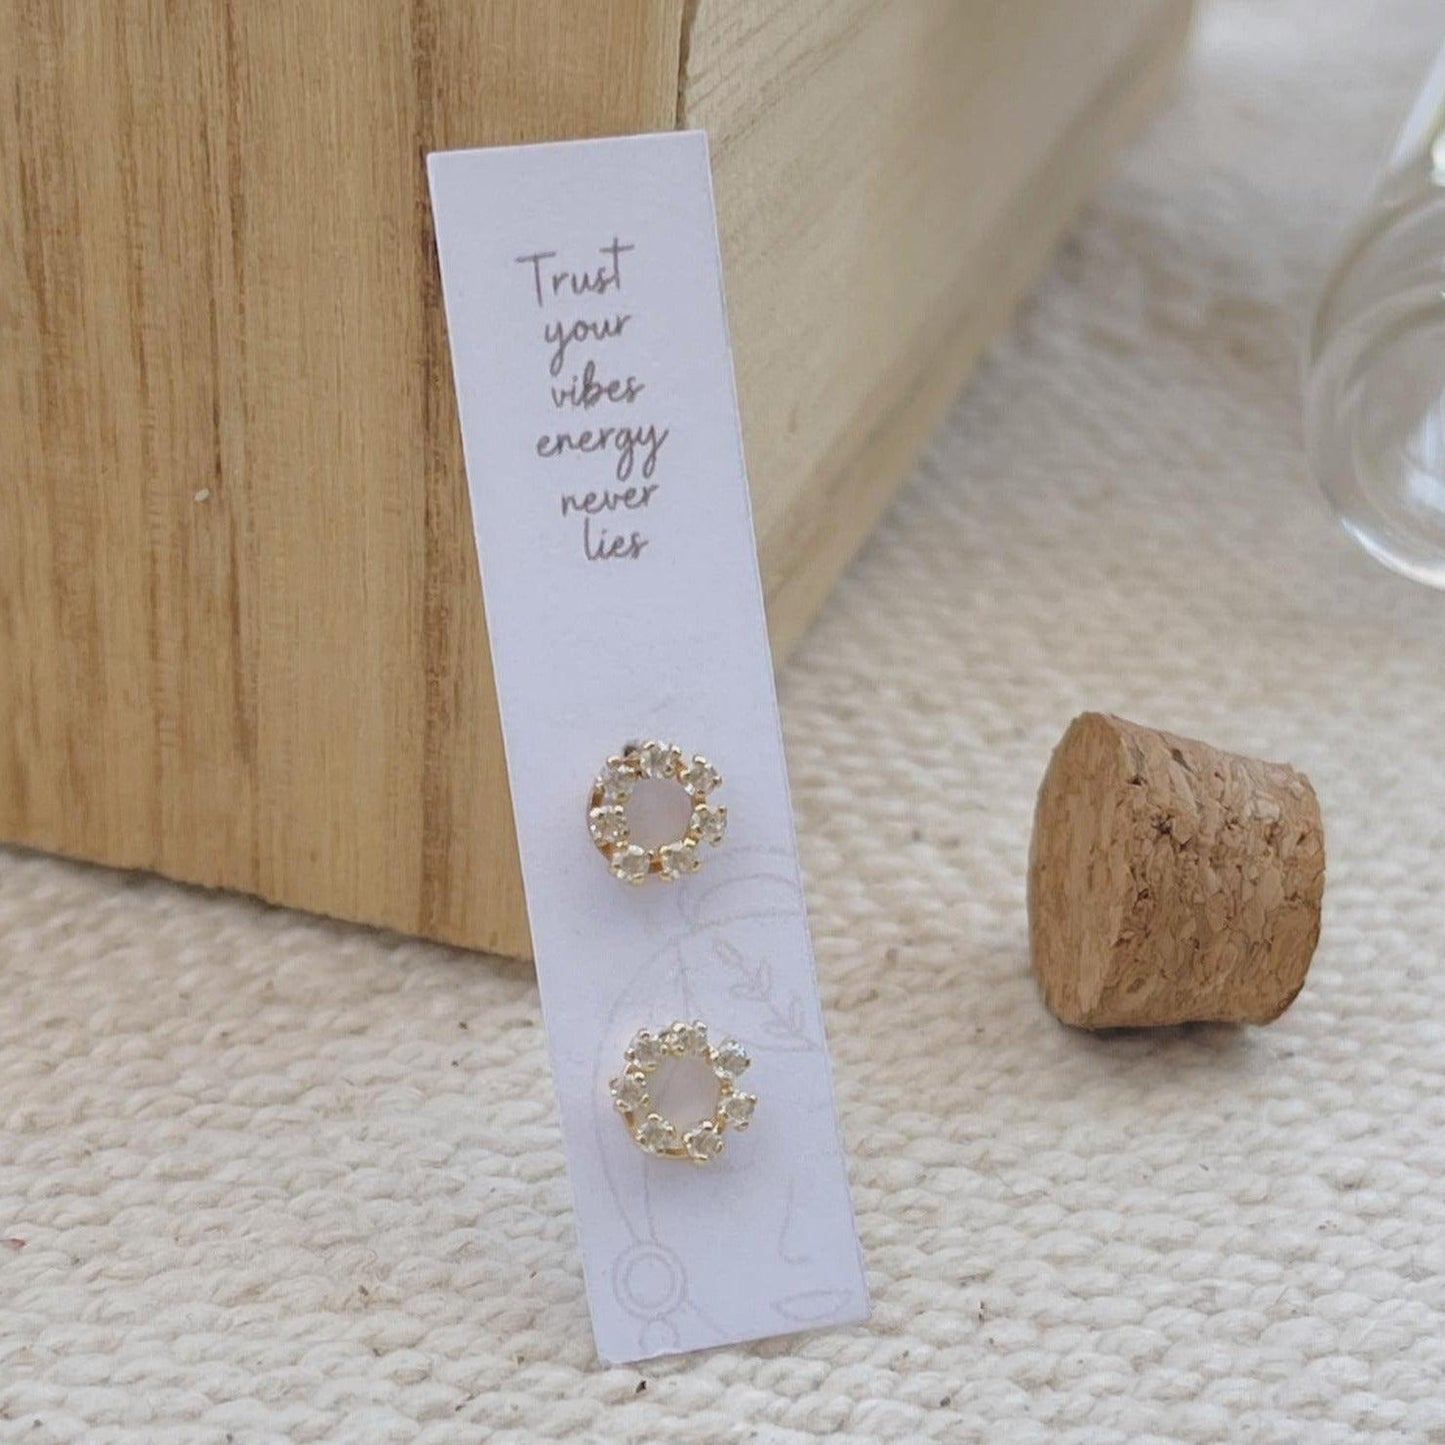 Beautiful and elegant, our gold round stud earrings are minimalist and fun. The perfect pair to dress up a casual outfit, or when you want to add a bit of luxe to your look. Wear them everyday!